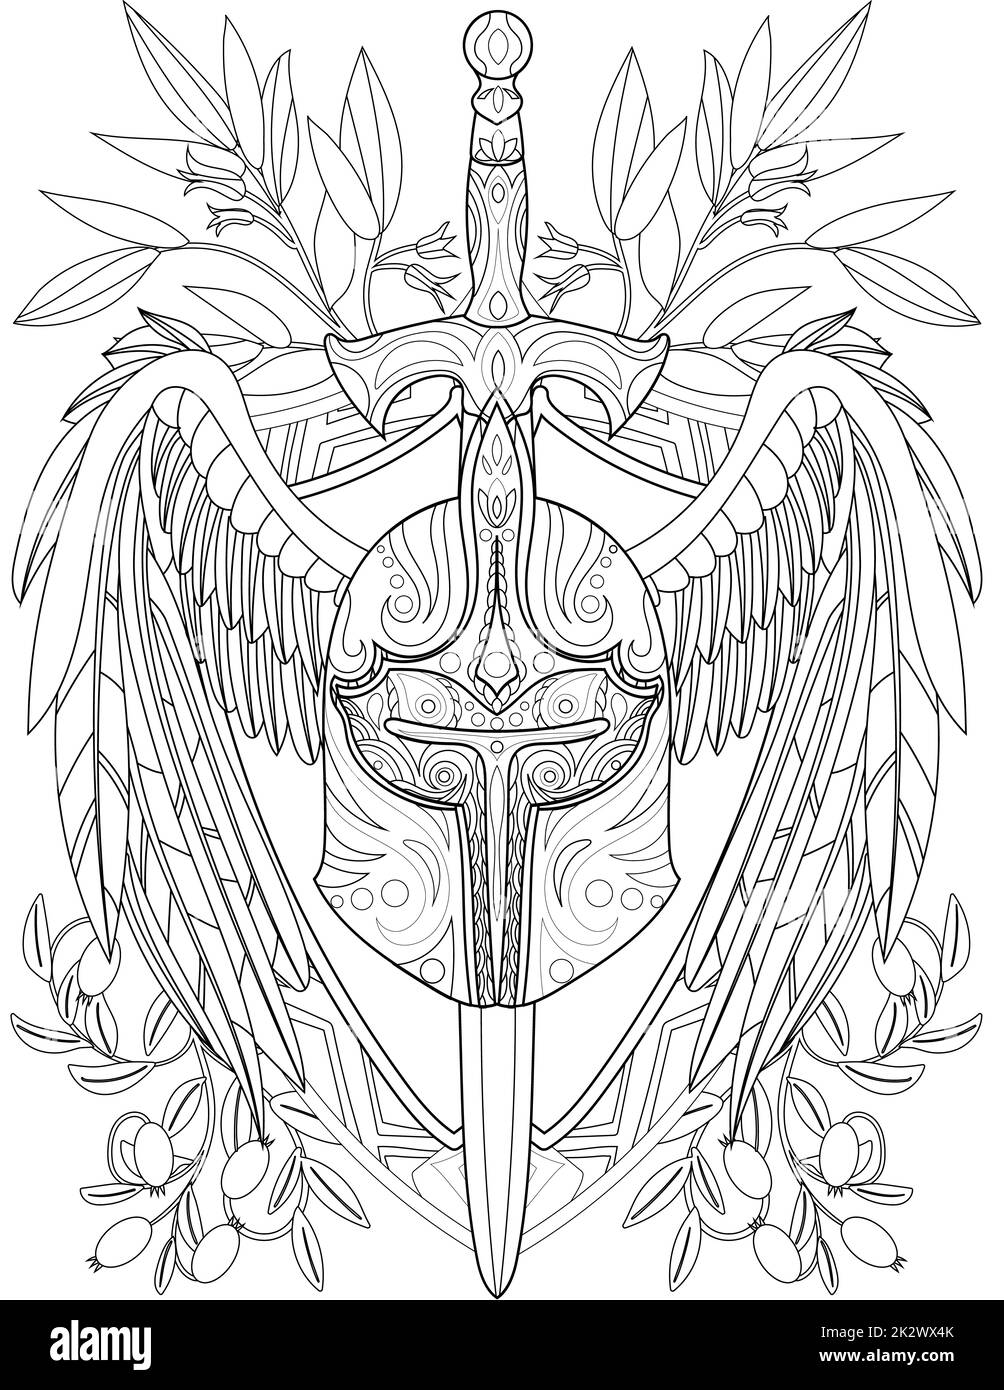 Illustration Of Fantastic Hard Warrior Helmet With Pierced Long Sword And Large Wings. Weapon Run Through An Armored Barbute Line Drawing Wit A Big Feathers Stock Photo